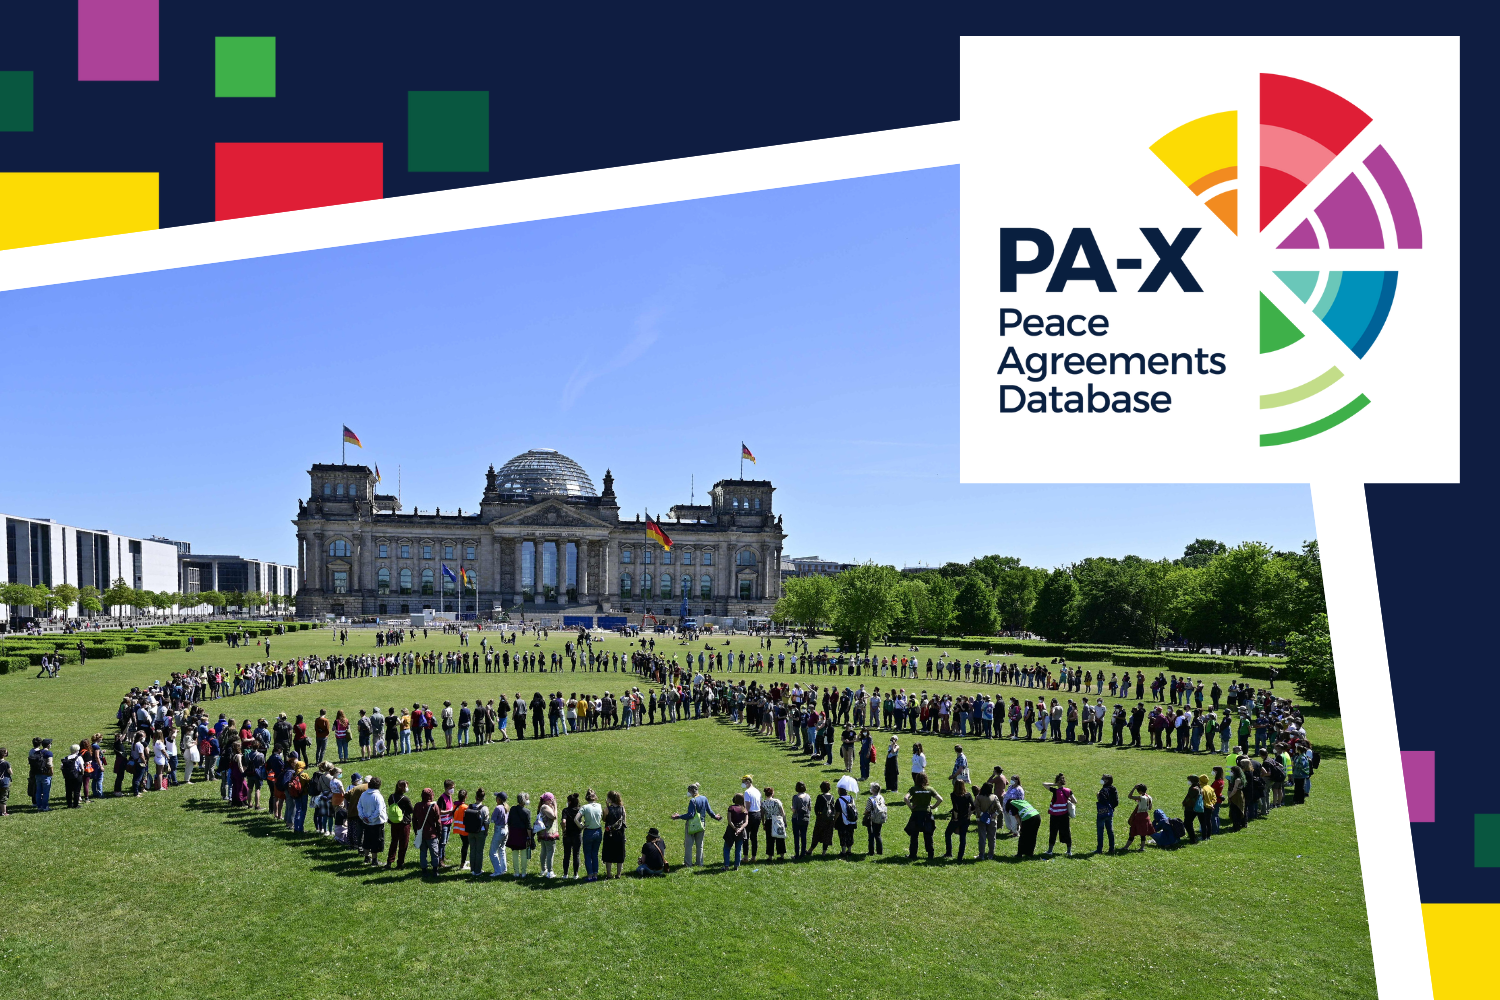 Changing characteristics of peace processes: New findings from the PA-X Database